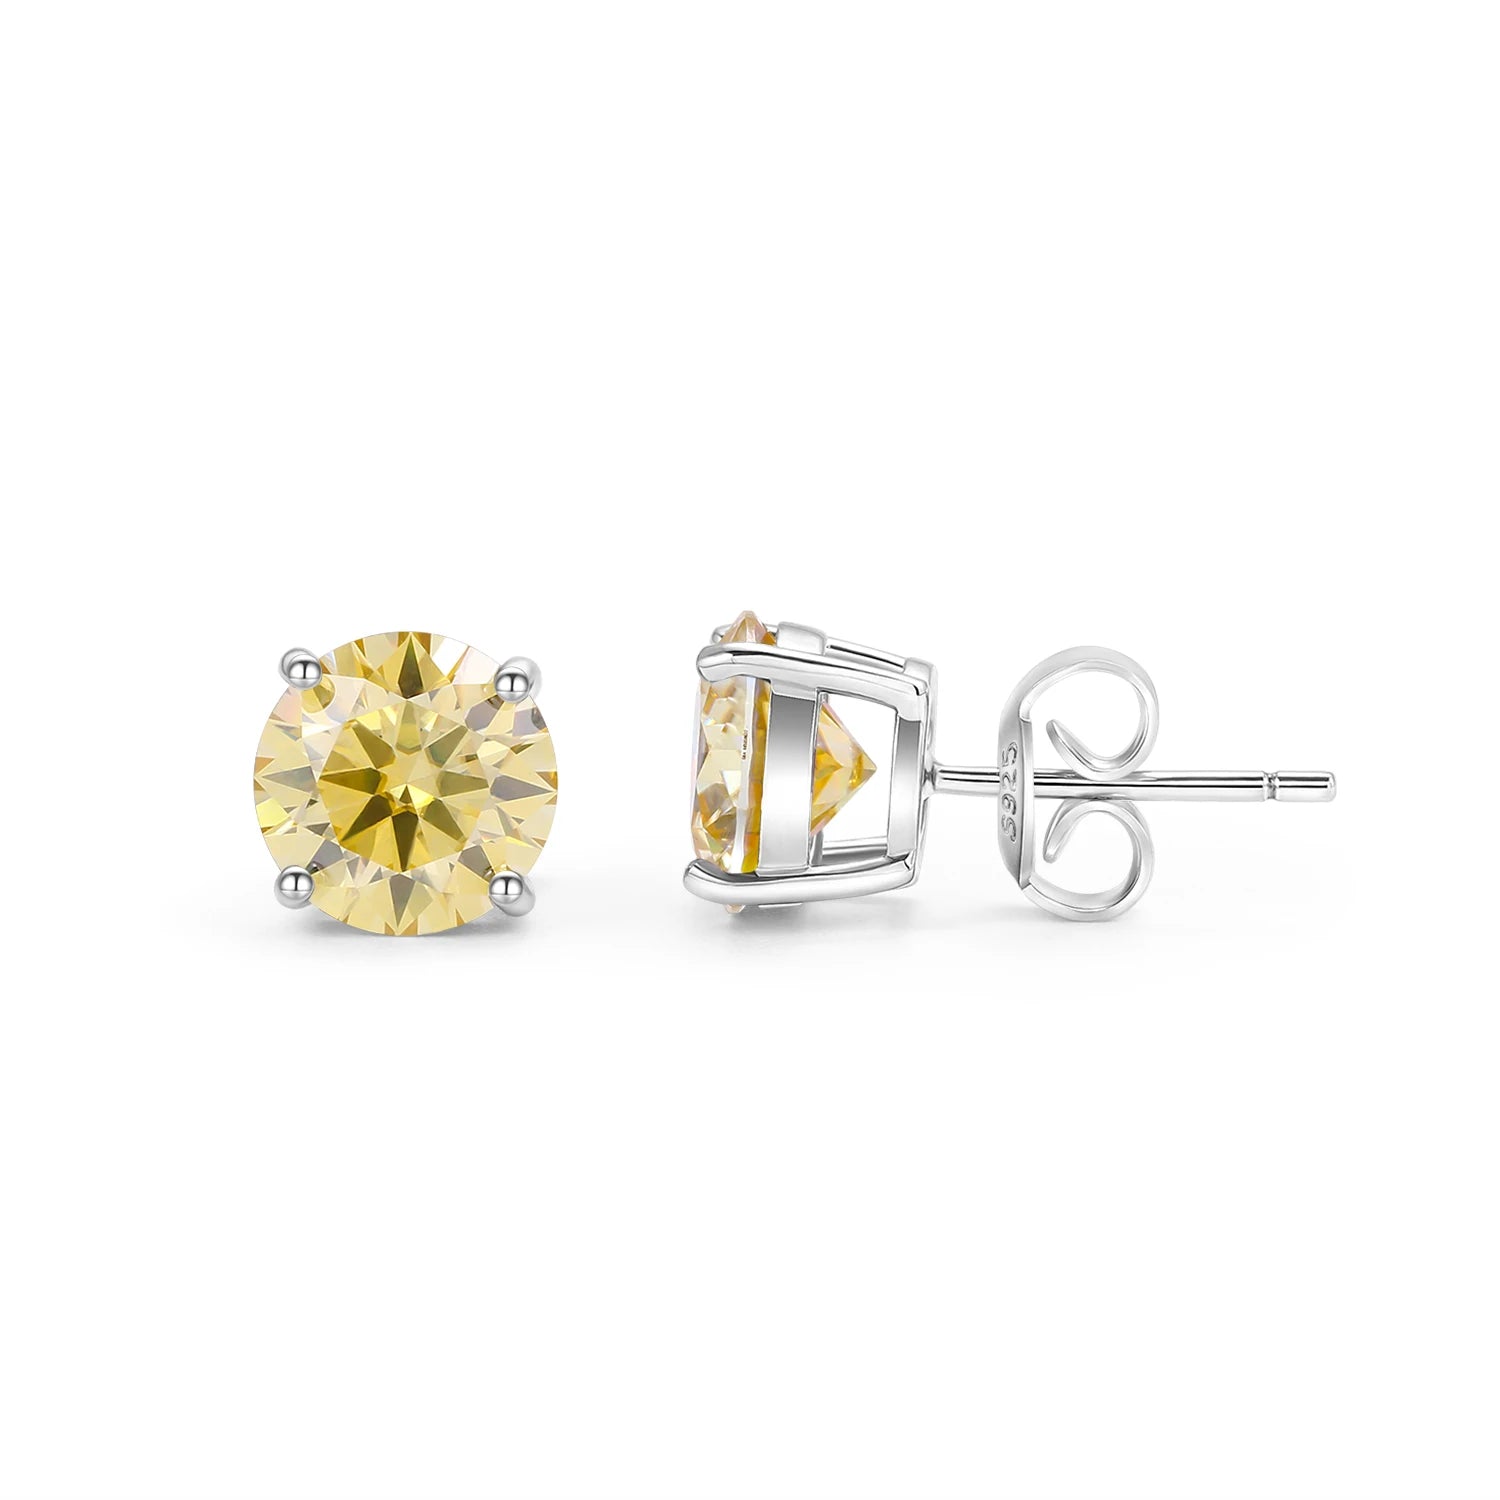 GEM'S BALLET Pink Moissanite 2.0 TW 8mm Round Cut Moissanite Stud Wedding Earrings in 925 Sterling Silver Four Prongs Earrings Yellow Moissanite 925 Sterling Silver CHINA